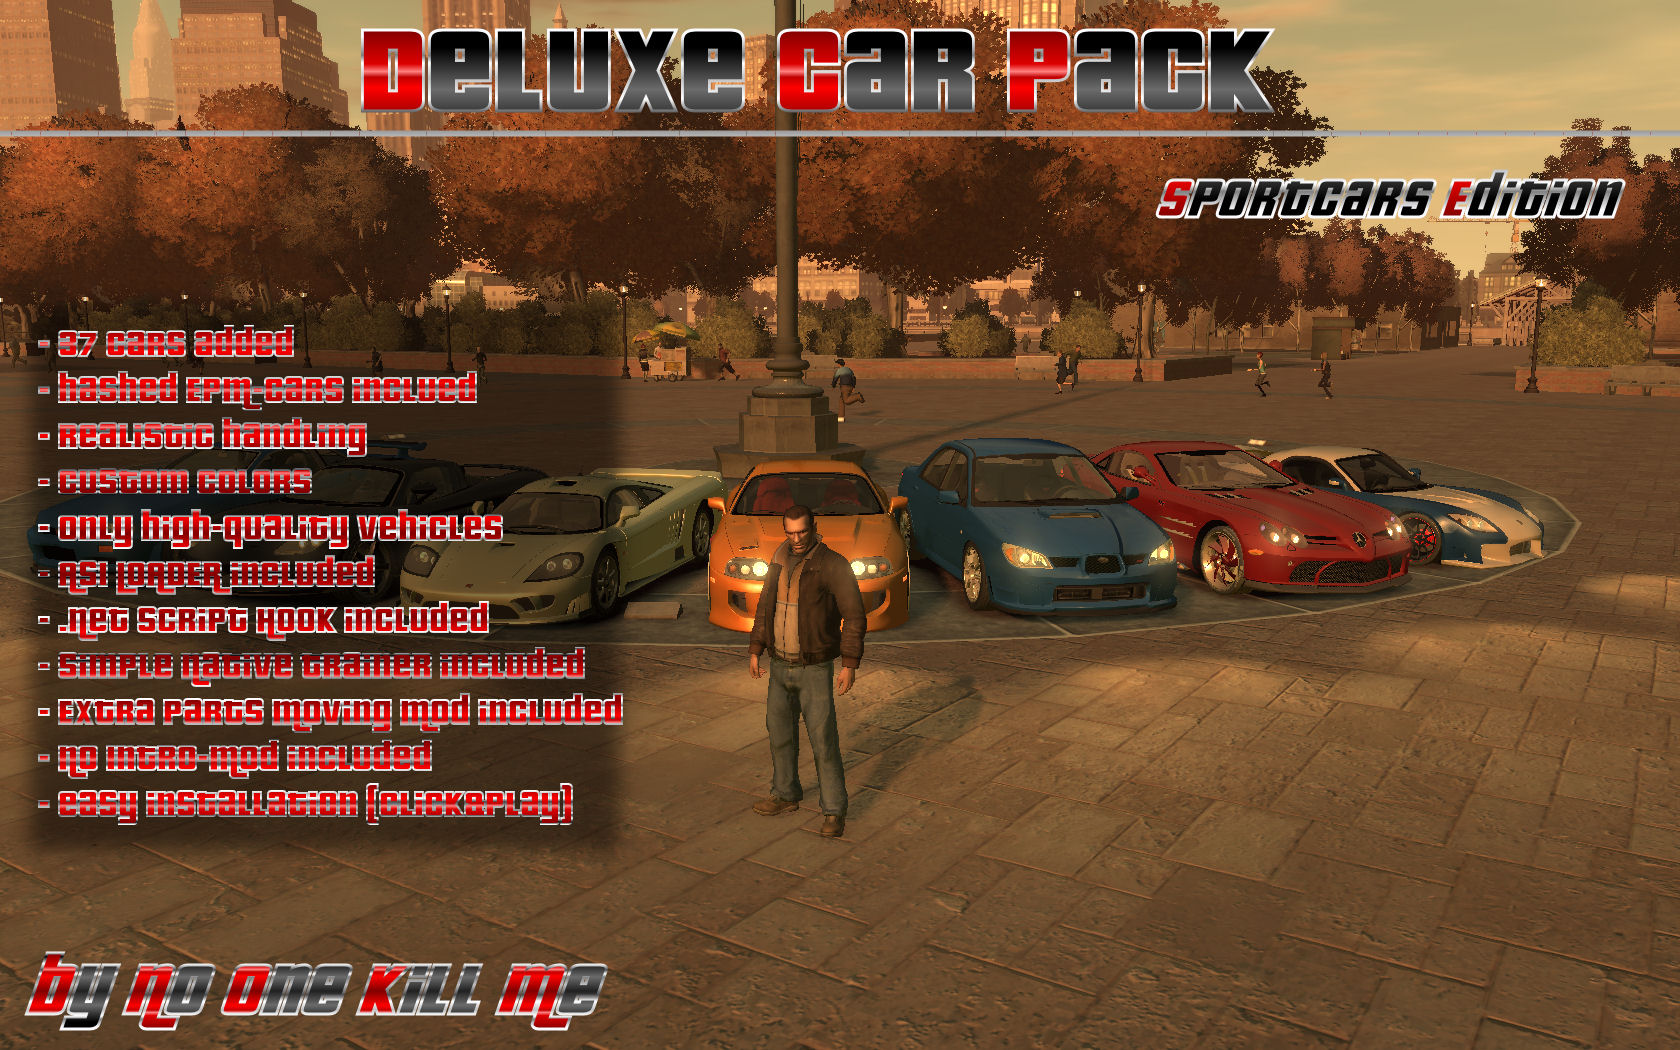 Deluxe Car Pack - Sportcars Edition V1.0 Installer mod for Grand Theft